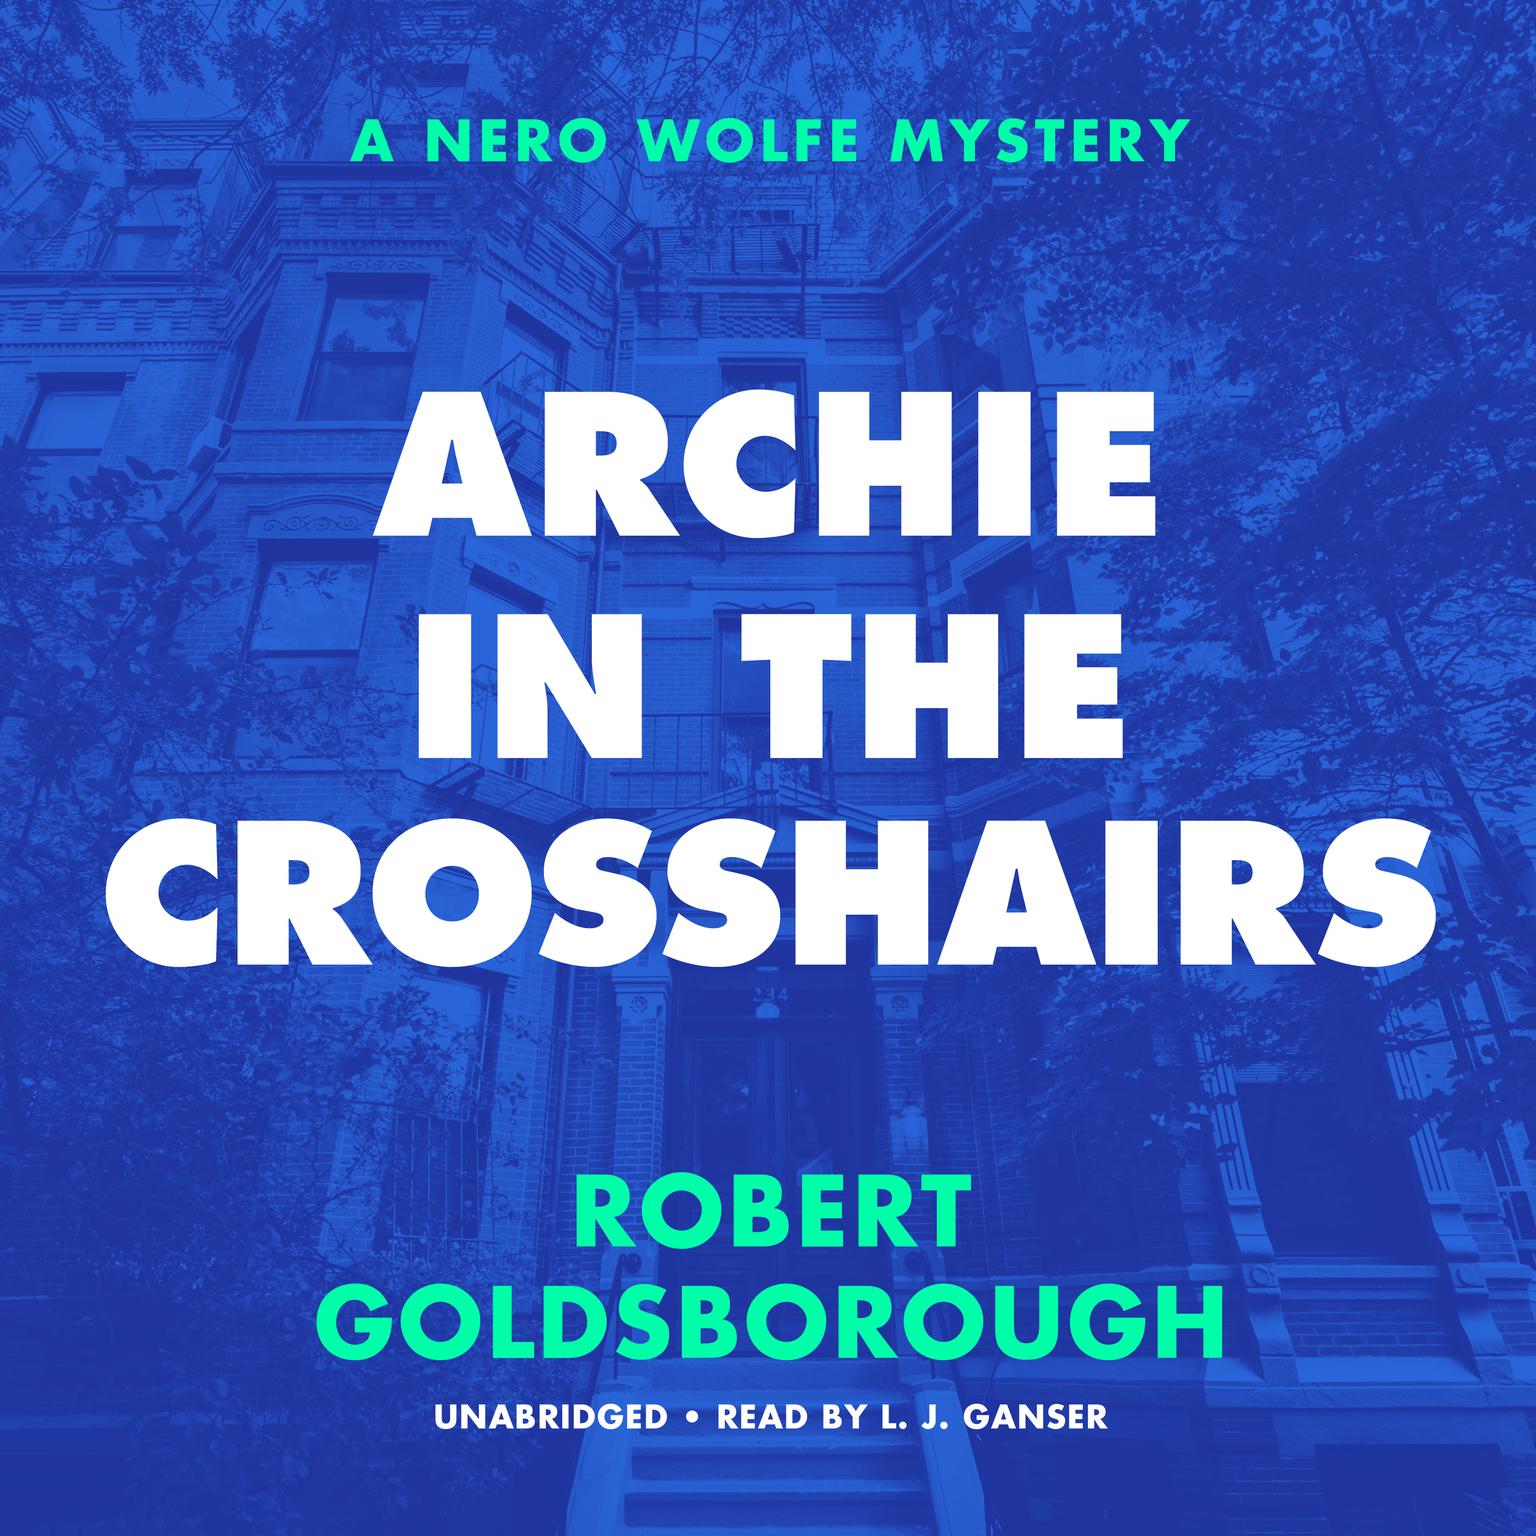 Archie in the Crosshairs: A Nero Wolfe Mystery Audiobook, by Robert Goldsborough